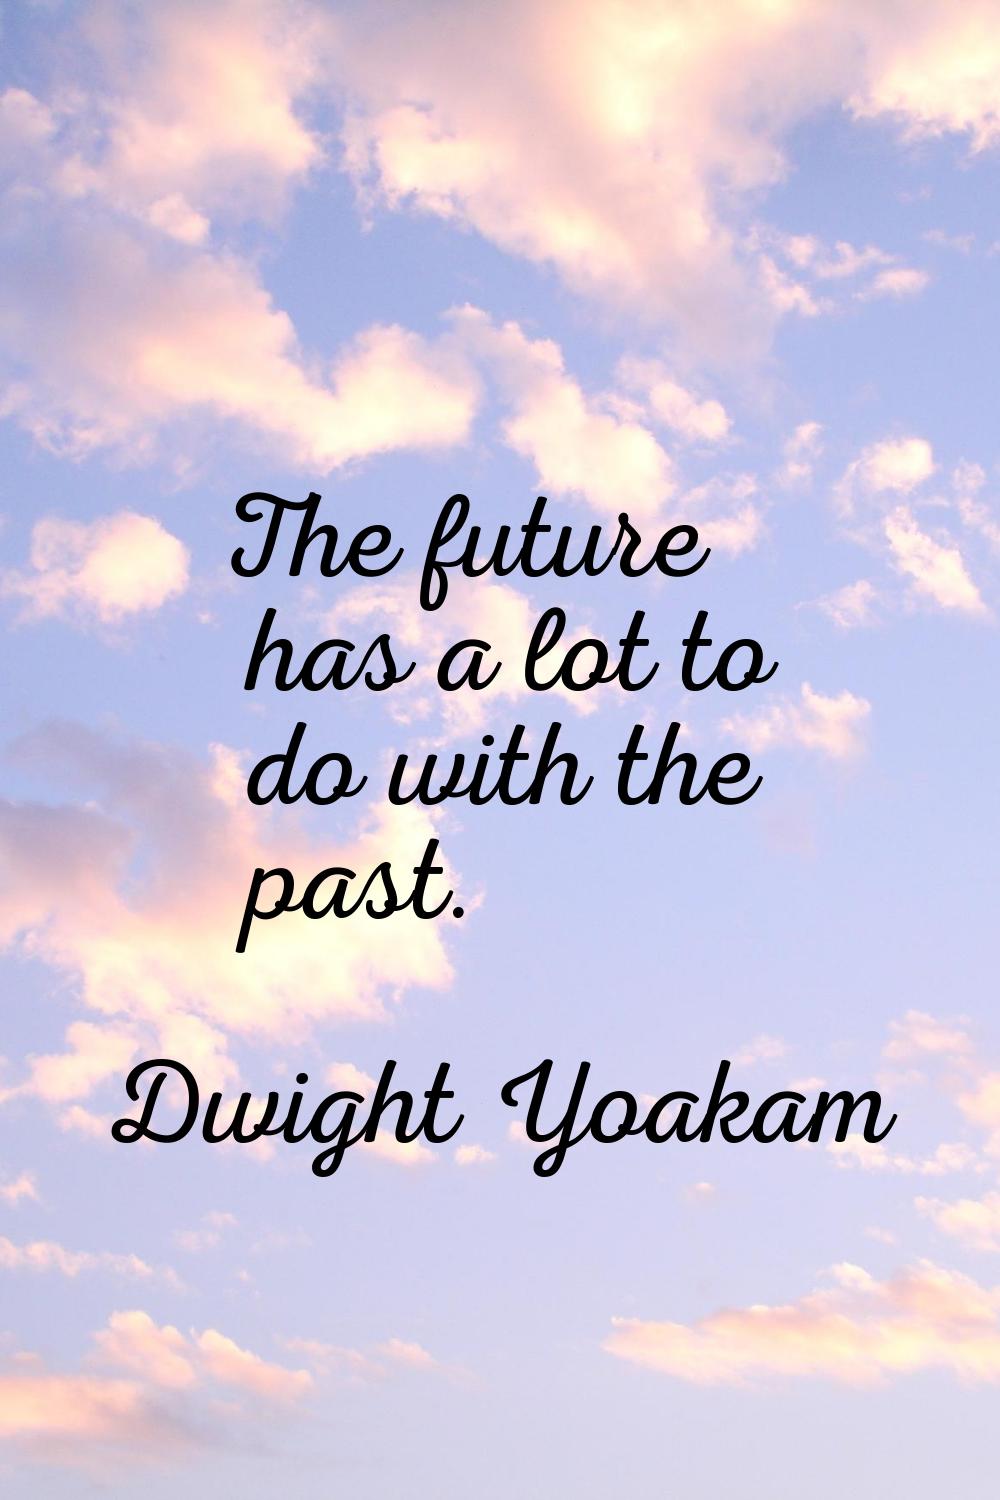 The future has a lot to do with the past.